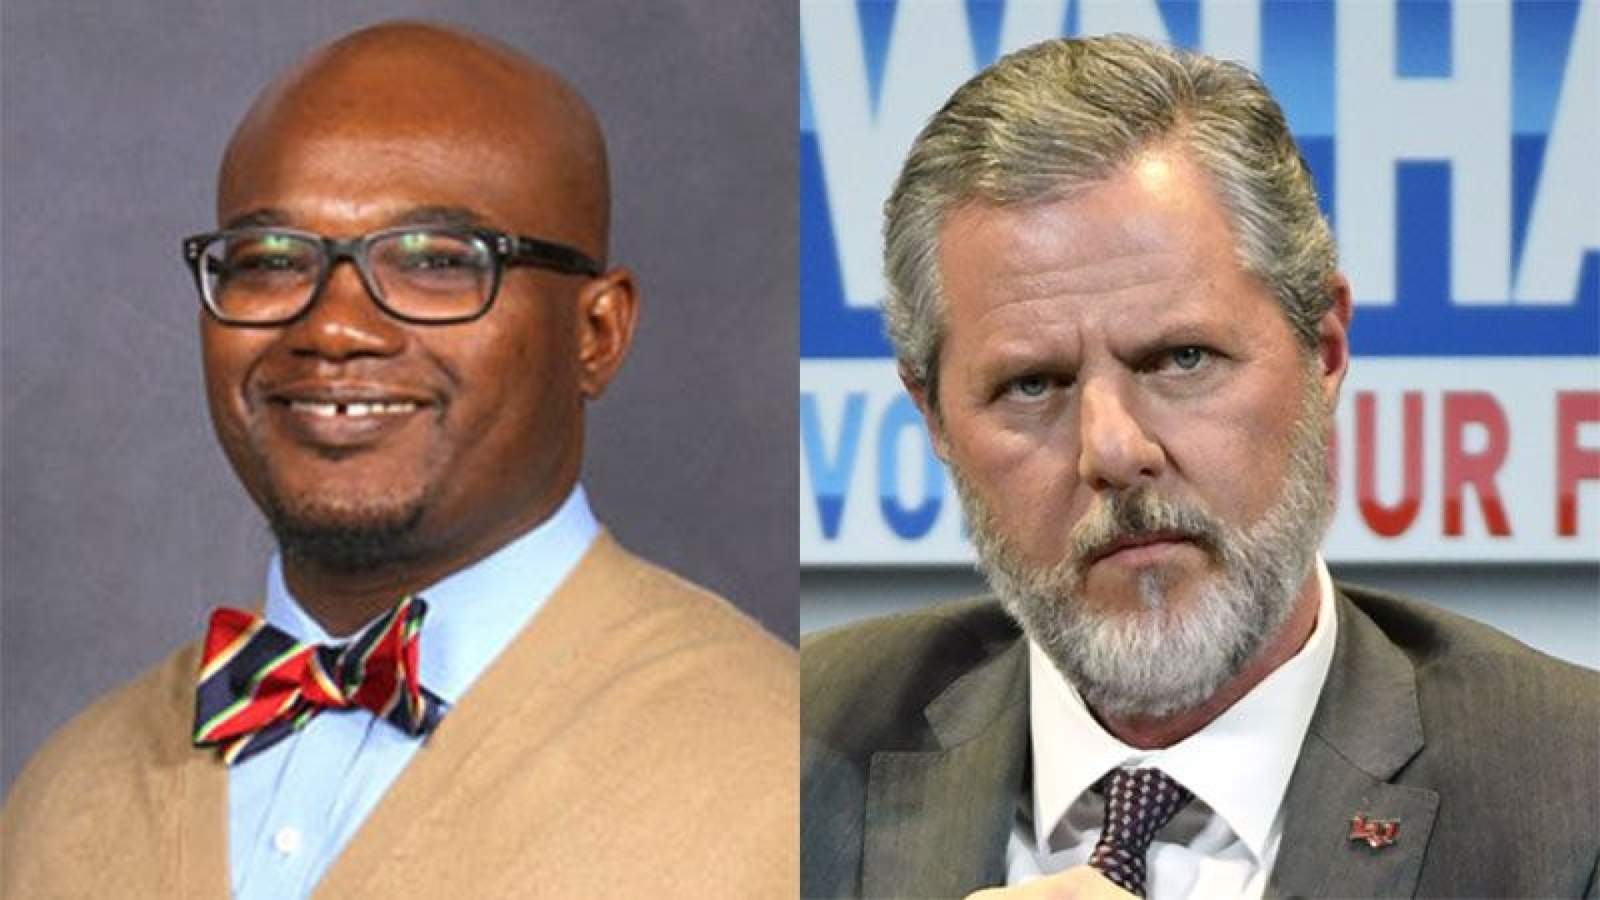 Black Liberty University instructor resigns in response to Jerry Falwell’s ‘racist’ tweets